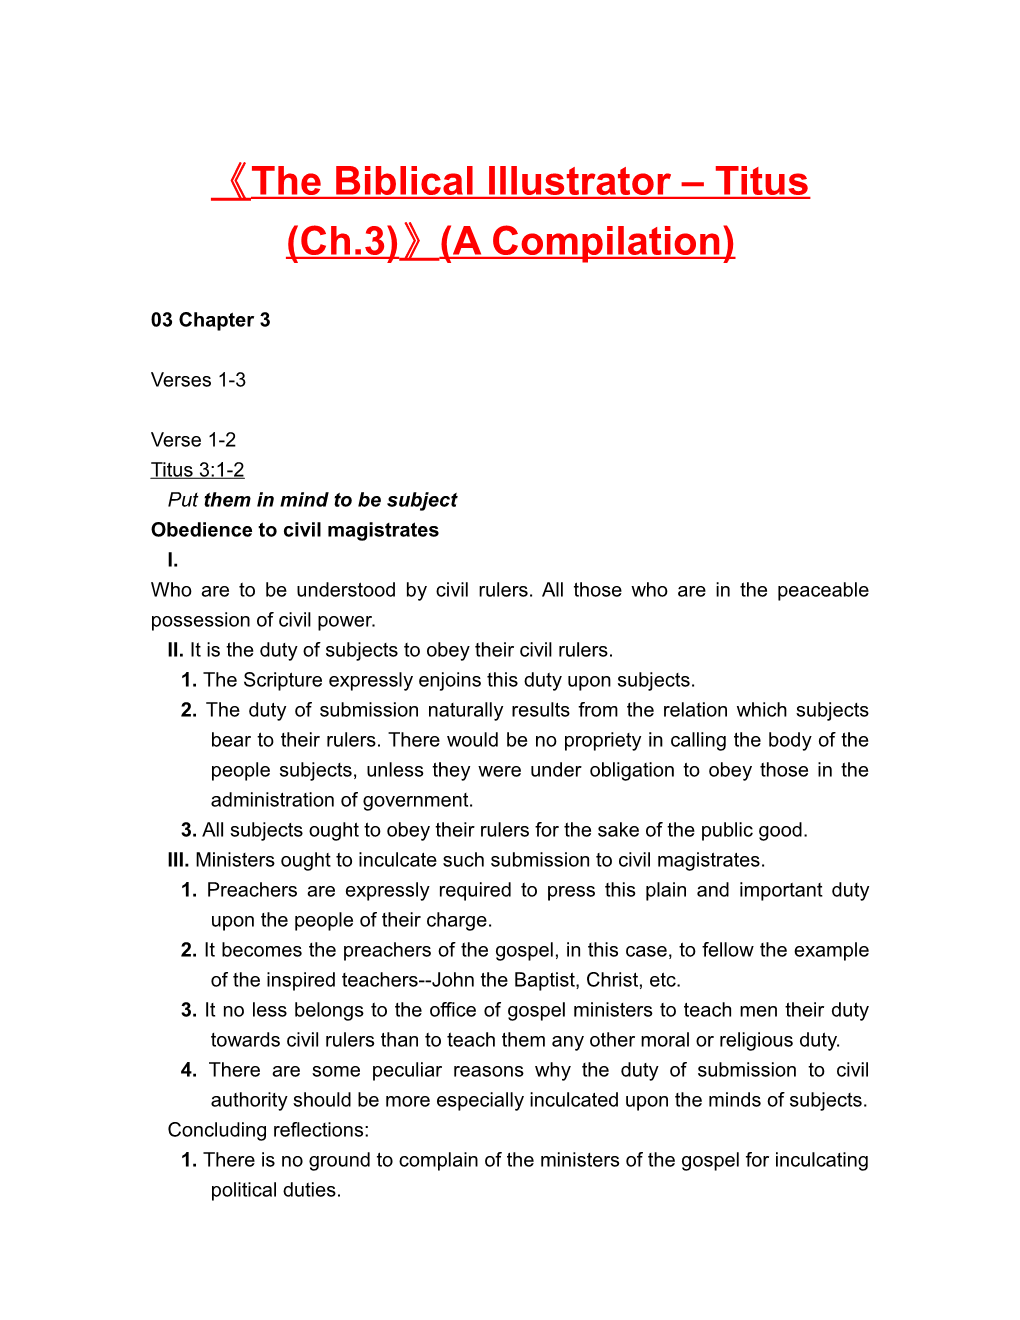 The Biblical Illustrator Titus (Ch.3) (A Compilation)